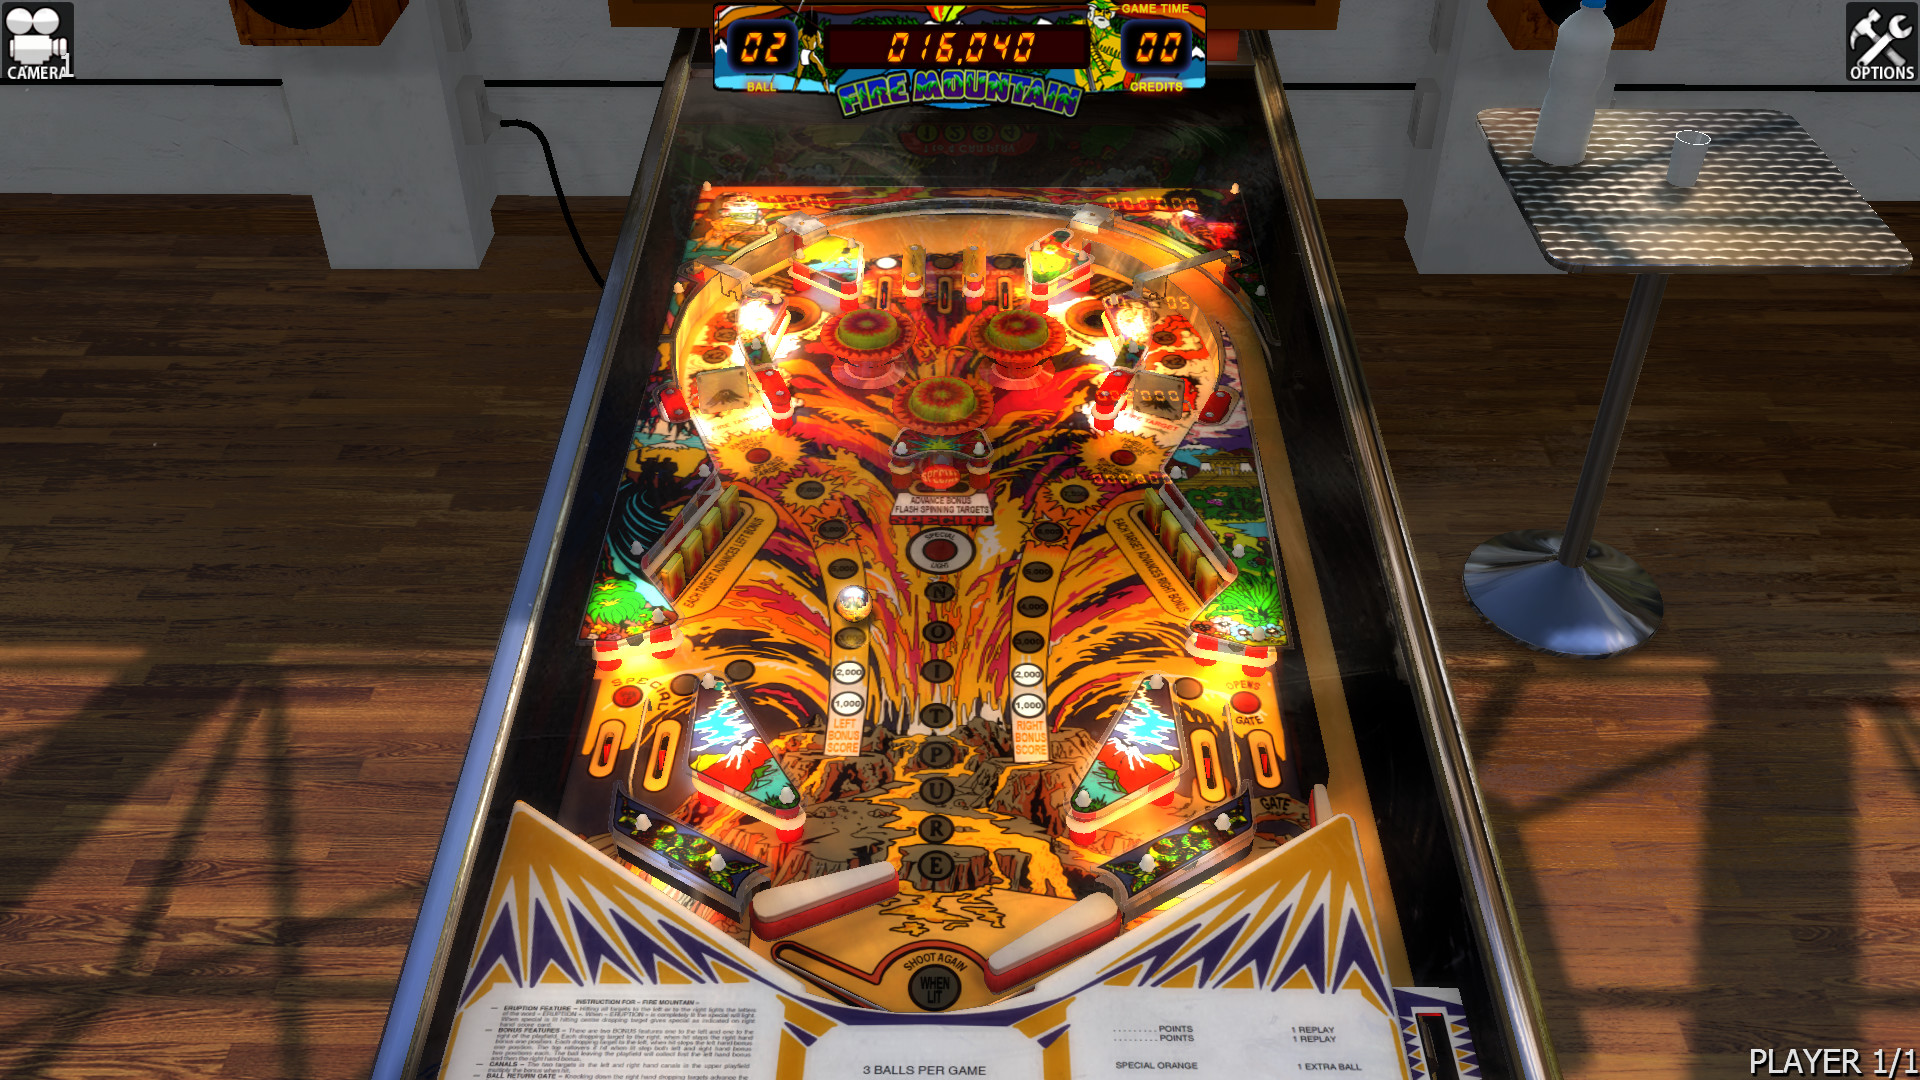 zaccaria pinball does not start